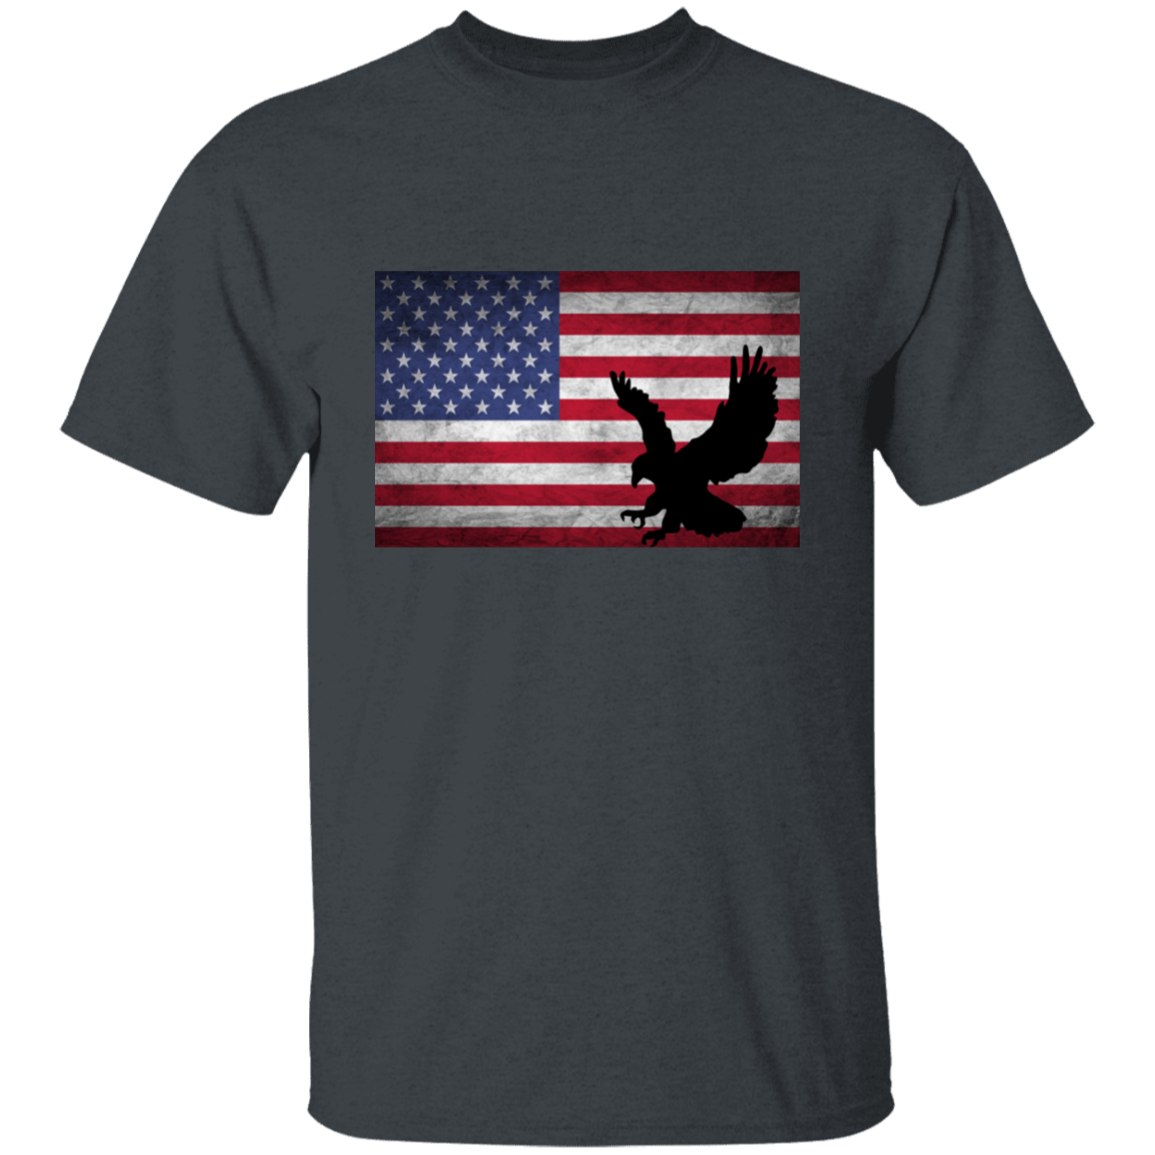 Flag with Eagle T-Shirt